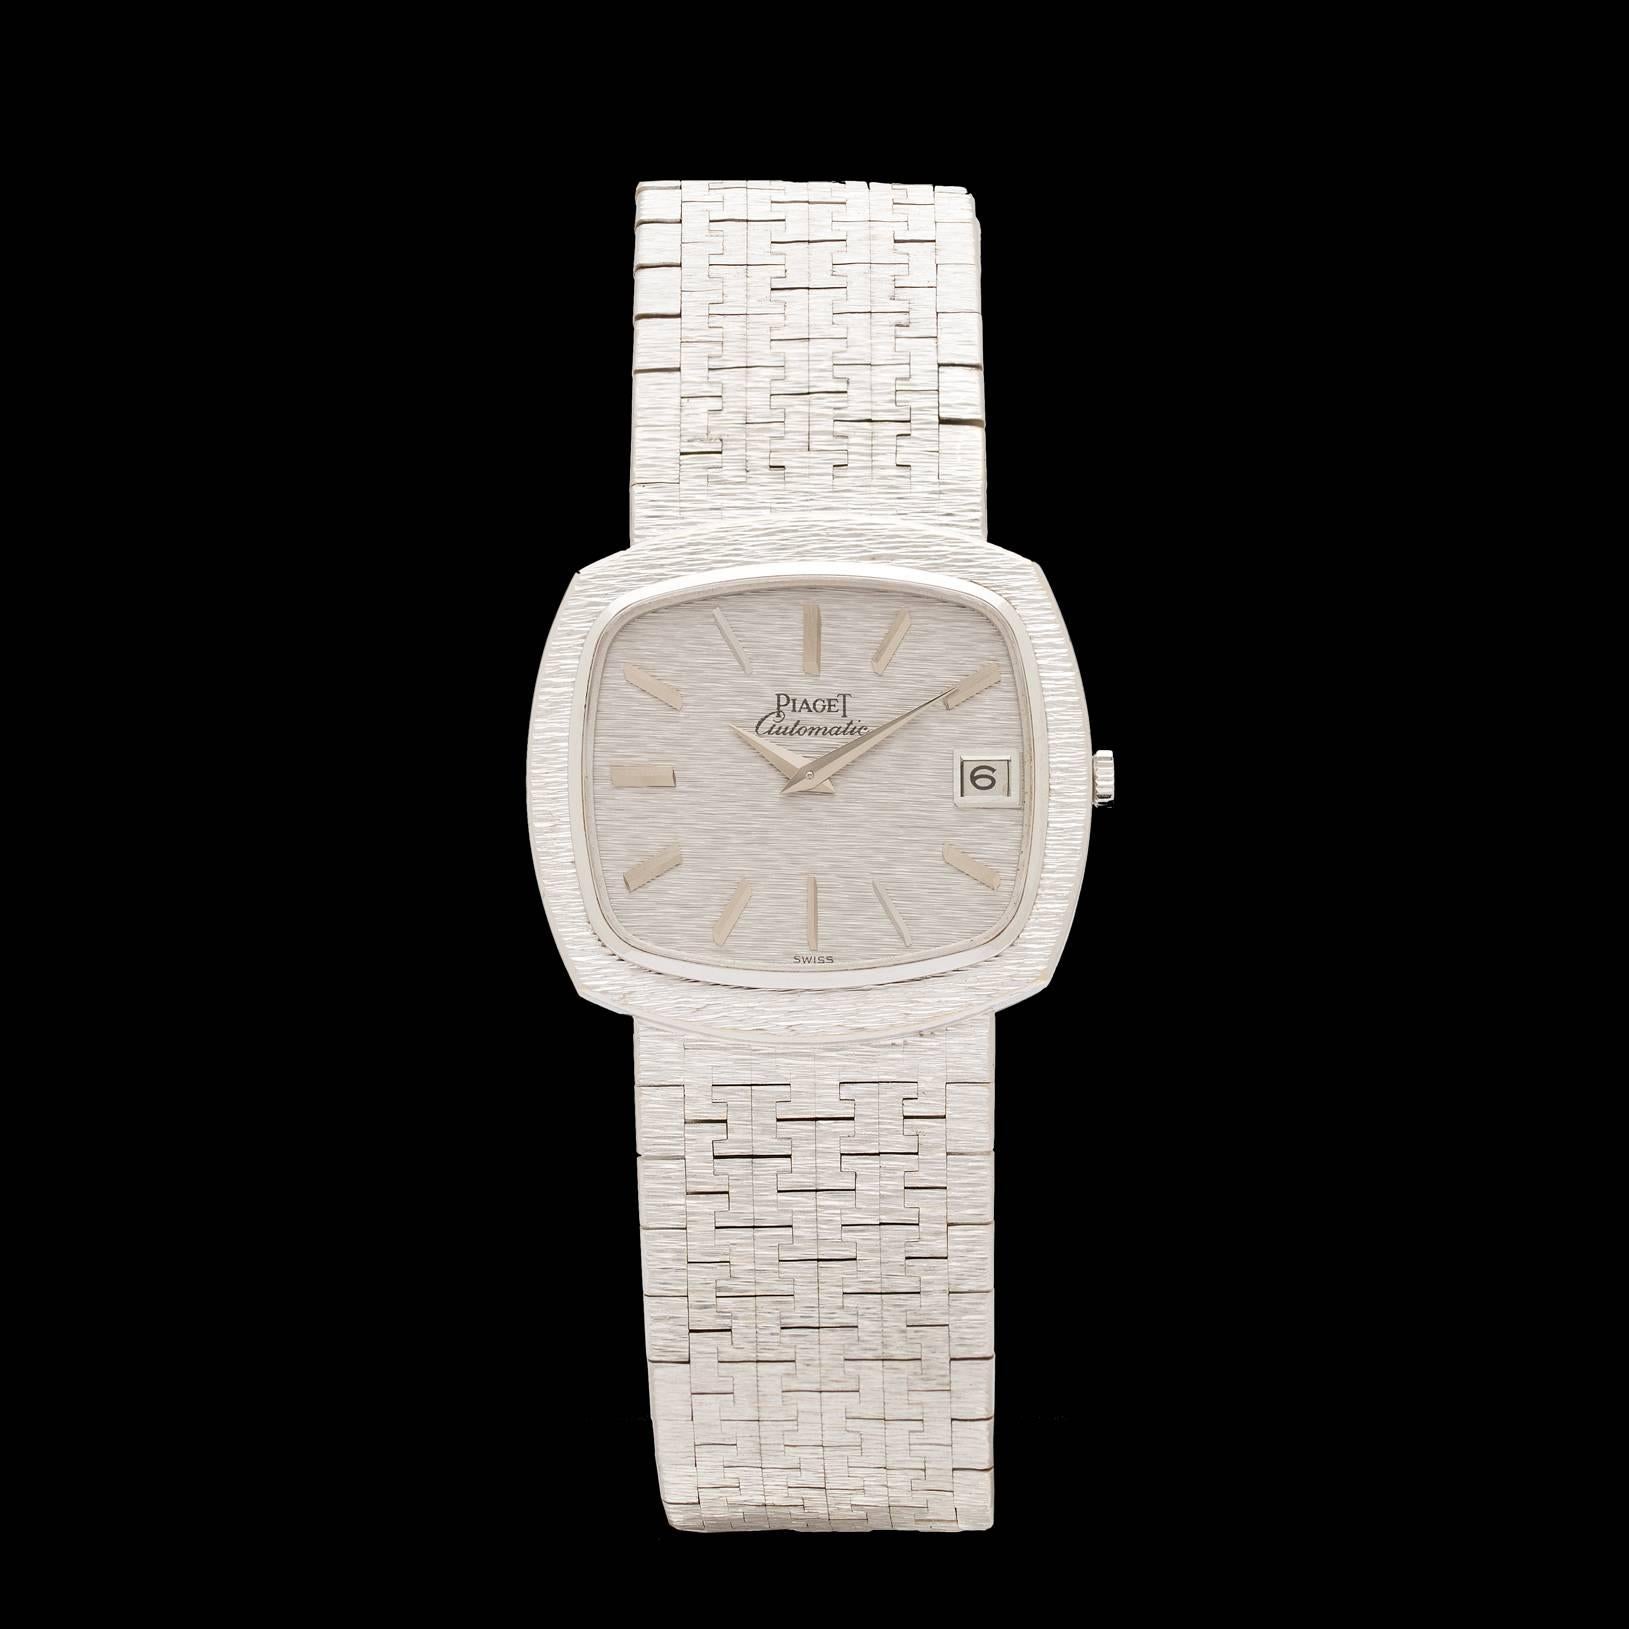 Piaget 18k white gold bracelet watch with a textured finish detail on the bracelet, case, and dial of the watch.  Case size is 32 mm, 8 inches long, with an automatic movement.  Model # 13431A6.  Total weight of the watch is 96.3 grams.